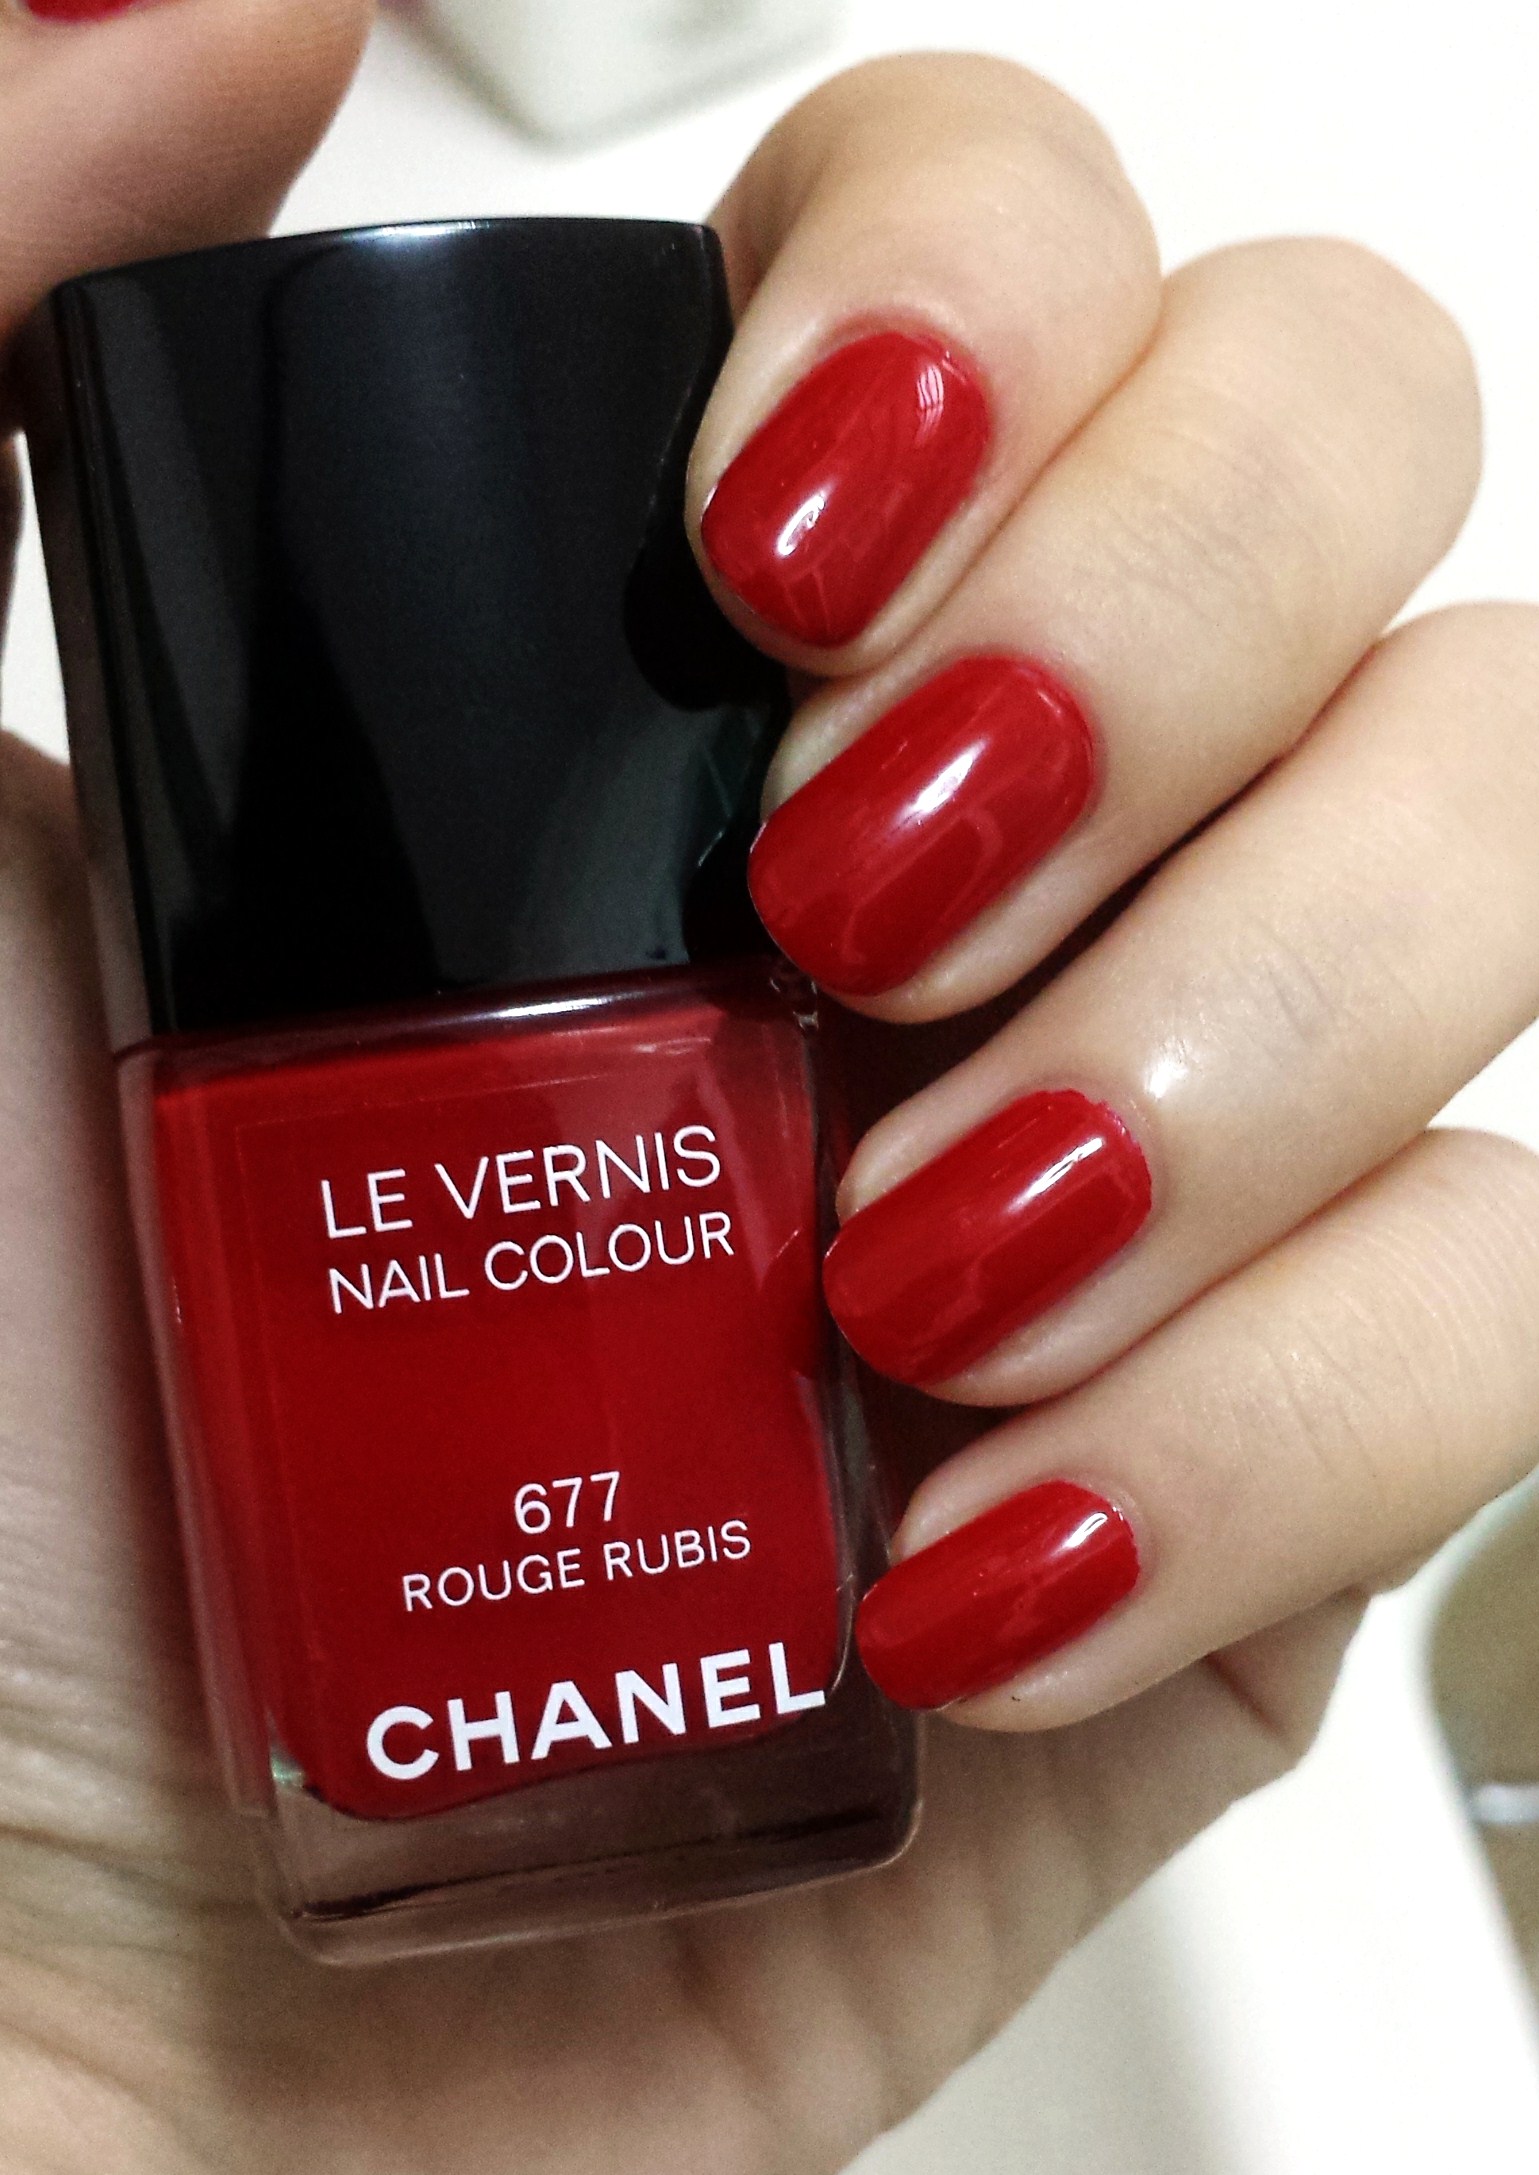 Chanel Le Vernis nail colour: Rouge rubis 677 review and swatches – Jolene  Tay